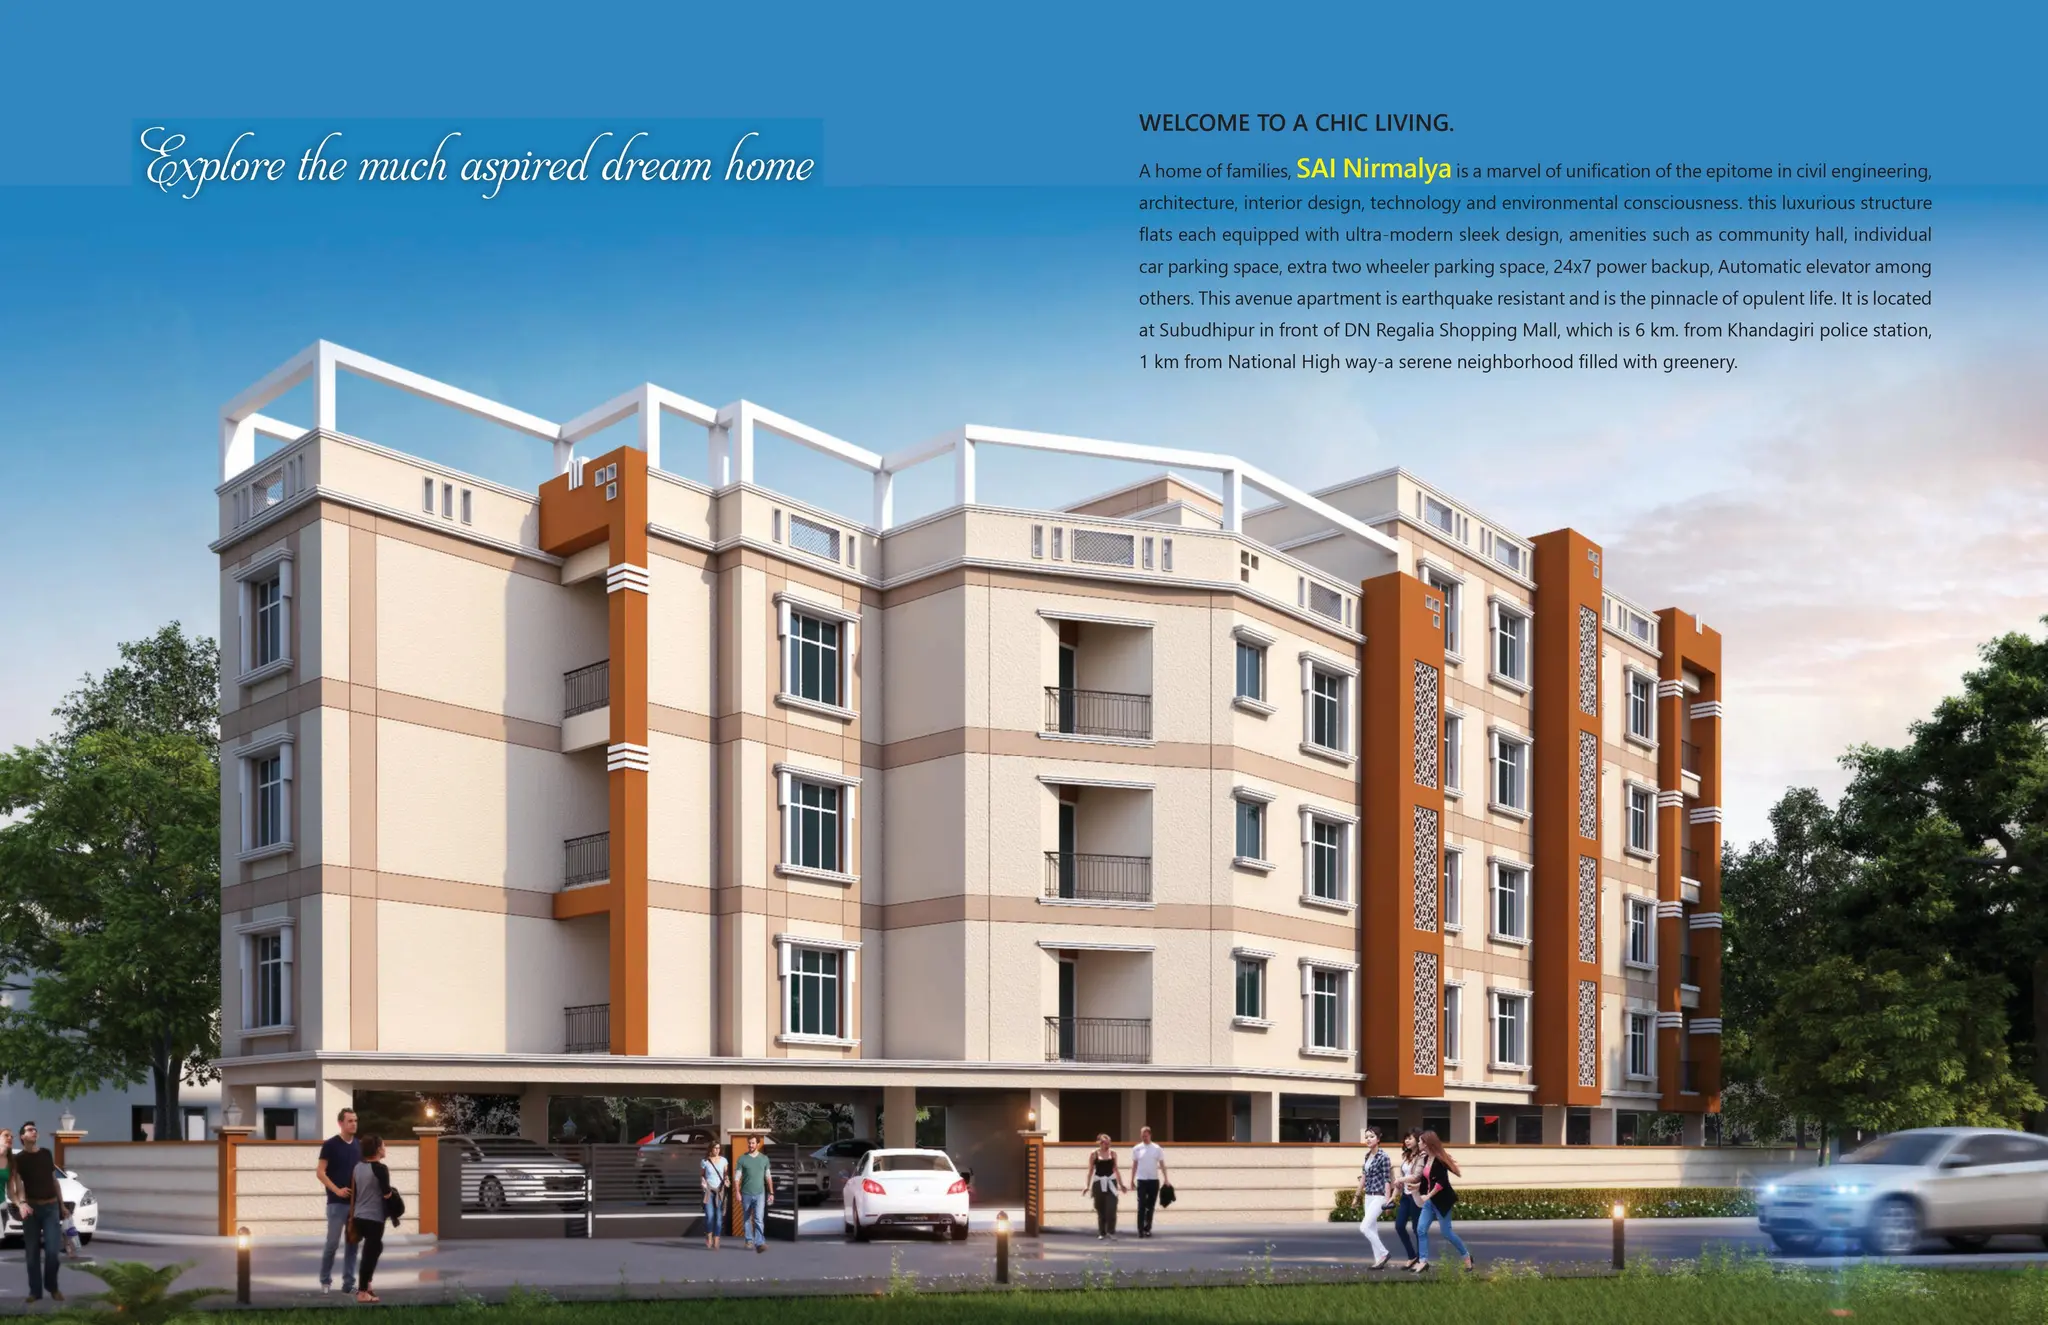 WELCOME TO A CHIC LIVING.
A home of families, SAI Nirmalya is a marvel of unification of the epitome in civil engineering,
architecture, interior design, technology and environmental consciousness. this luxurious structure
flats each equipped with ultra-modern sleek design, amenities such as community hall, individual
car parking space, extra two wheeler parking space, 24x7 power backup, Automatic elevator among
others. This avenue apartment is earthquake resistant and is the pinnacle of opulent life. It is located
at Subudhipur in front of DN Regalia Shopping Mall, which is 6 km. from Khandagiri police station,
1 km from National High way-a serene neighborhood filled with greenery